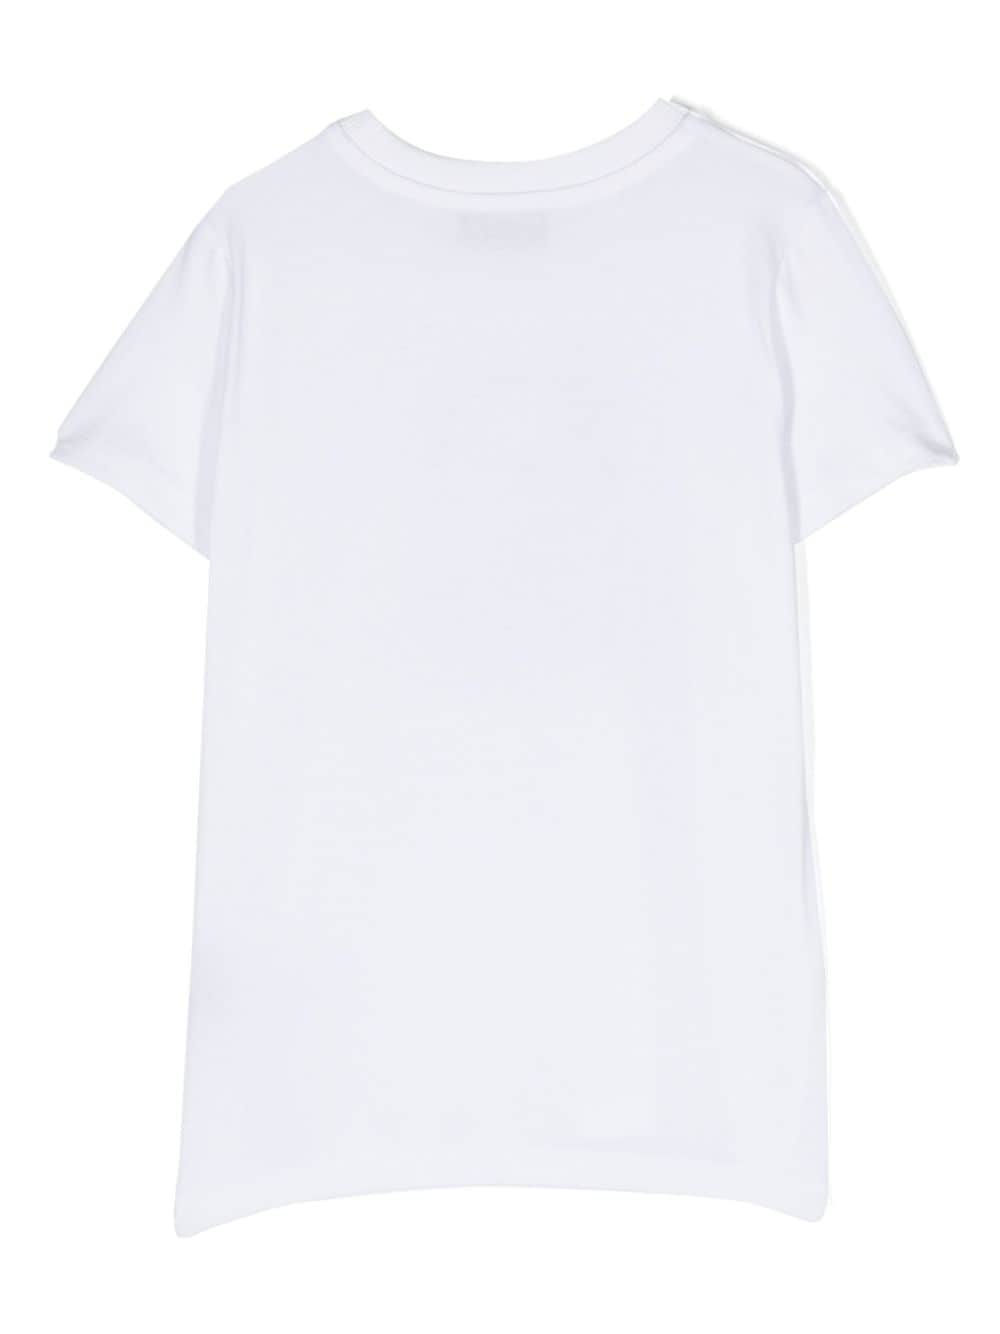 White t-shirt for children with print